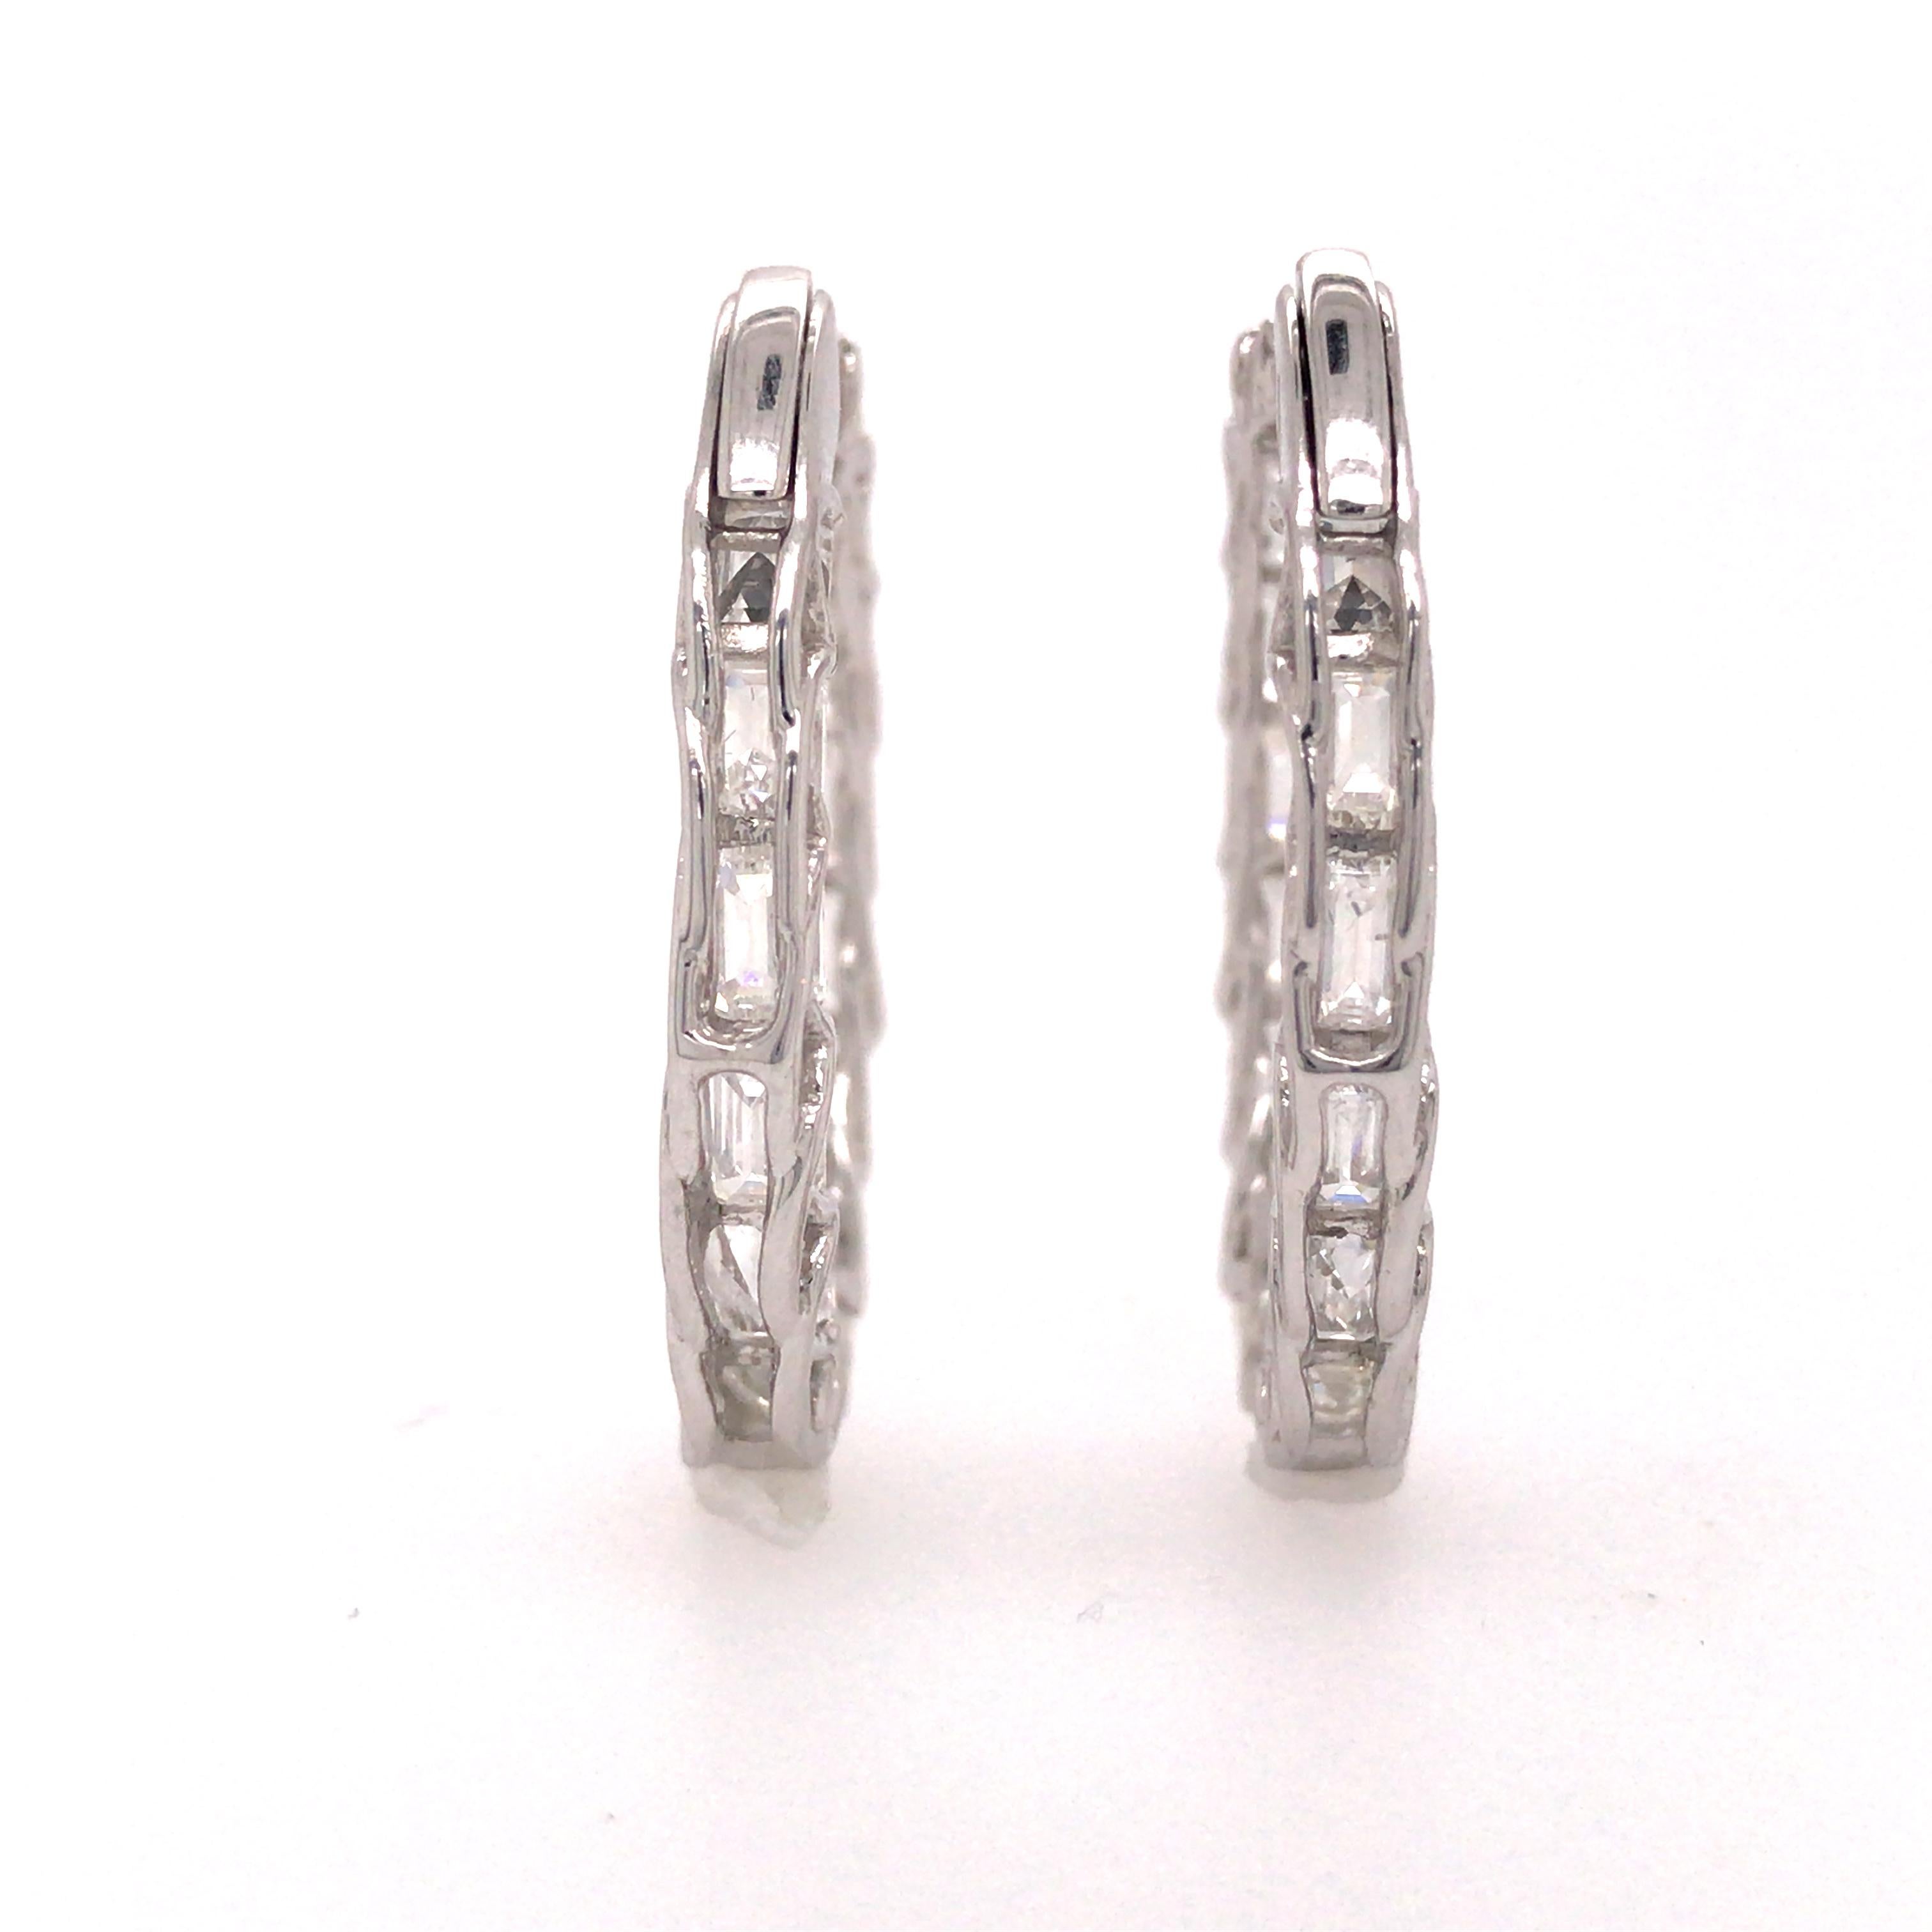 Emerald Diamond Elongated In/Out Hoop Earrings in 18K White Gold.  Emerald Cut Diamonds weighing 5.89 carat total weight, G-H in color and VS in clarity are expertly set.  The Earrings measure 1 1/8 inch in length and 1 inch in width.  8.10 grams.